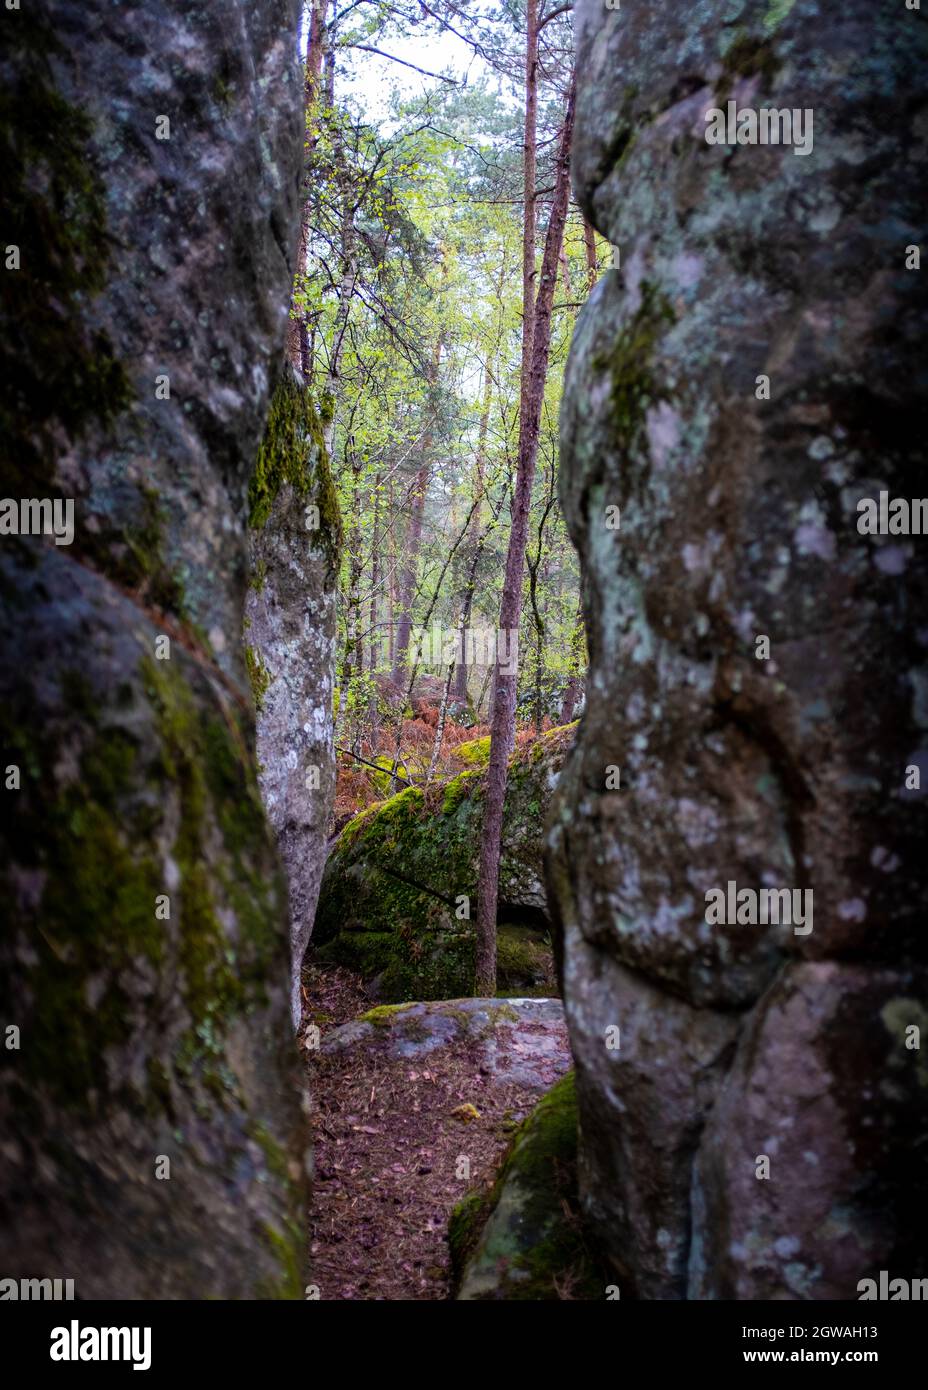 Forest seen through a rock slit, taken on a late winter overcast day in the Fontainebleau forest, France Stock Photo